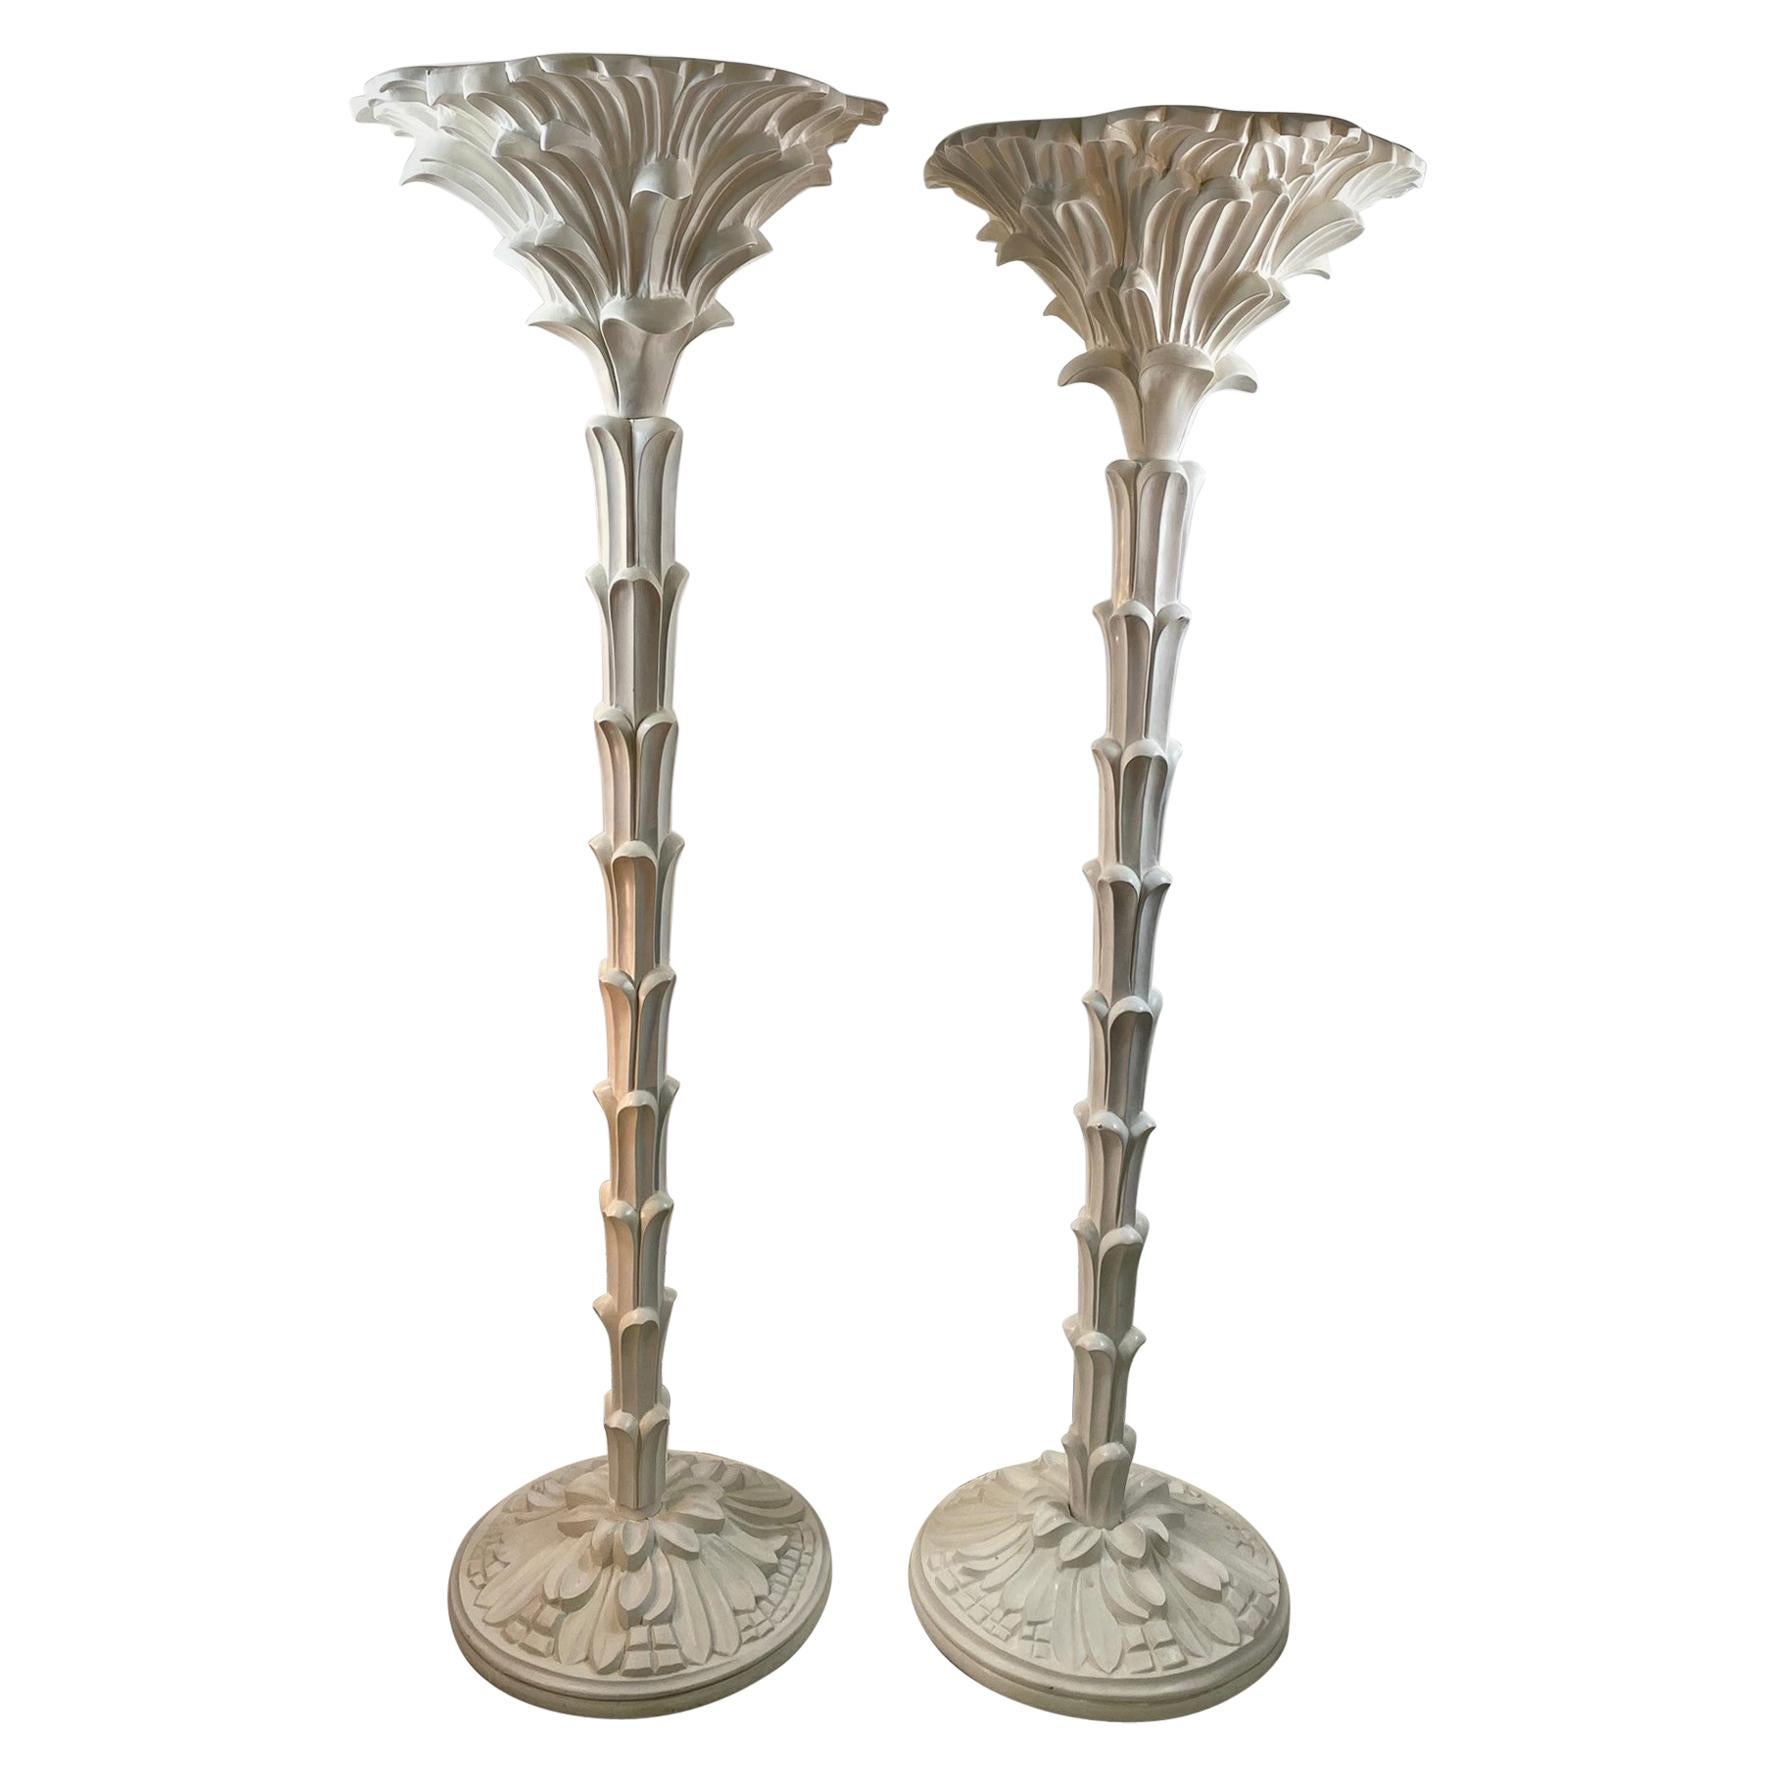 Modern Serge Roche Style Torchère Floor Lamps For Sale